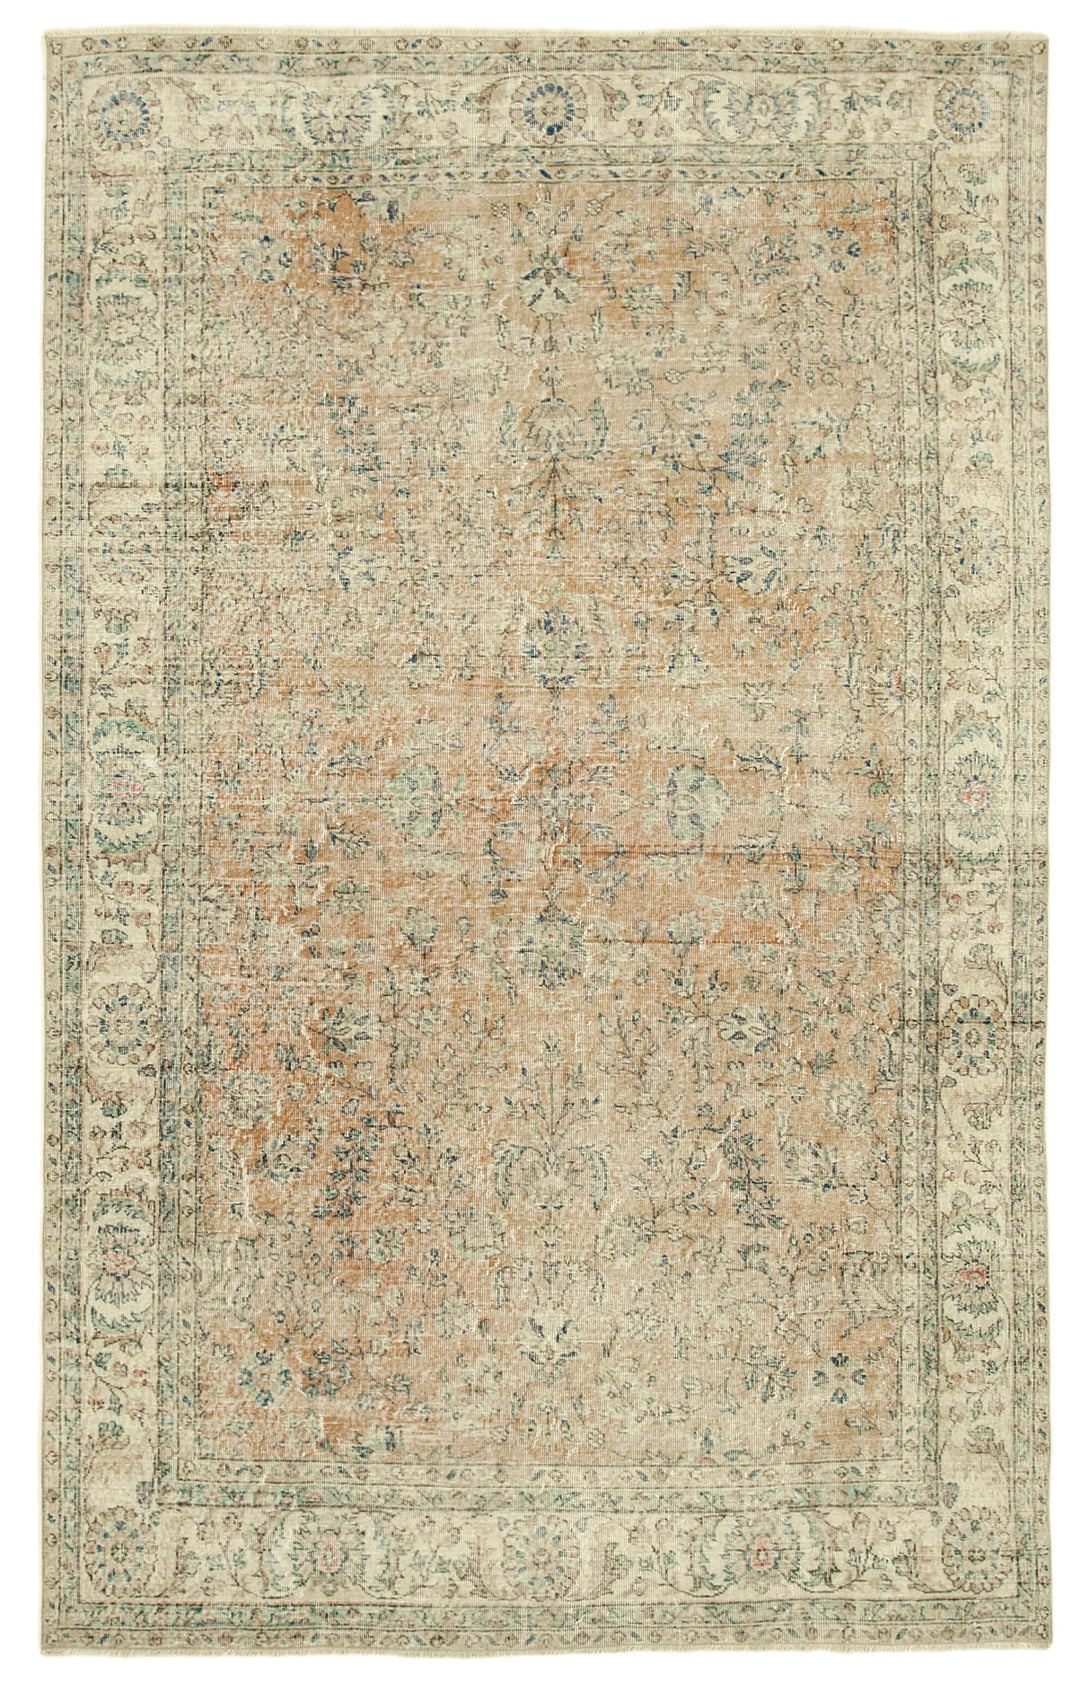 Handmade White Wash Area Rug > Design# OL-AC-38823 > Size: 6'-10" x 10'-9", Carpet Culture Rugs, Handmade Rugs, NYC Rugs, New Rugs, Shop Rugs, Rug Store, Outlet Rugs, SoHo Rugs, Rugs in USA